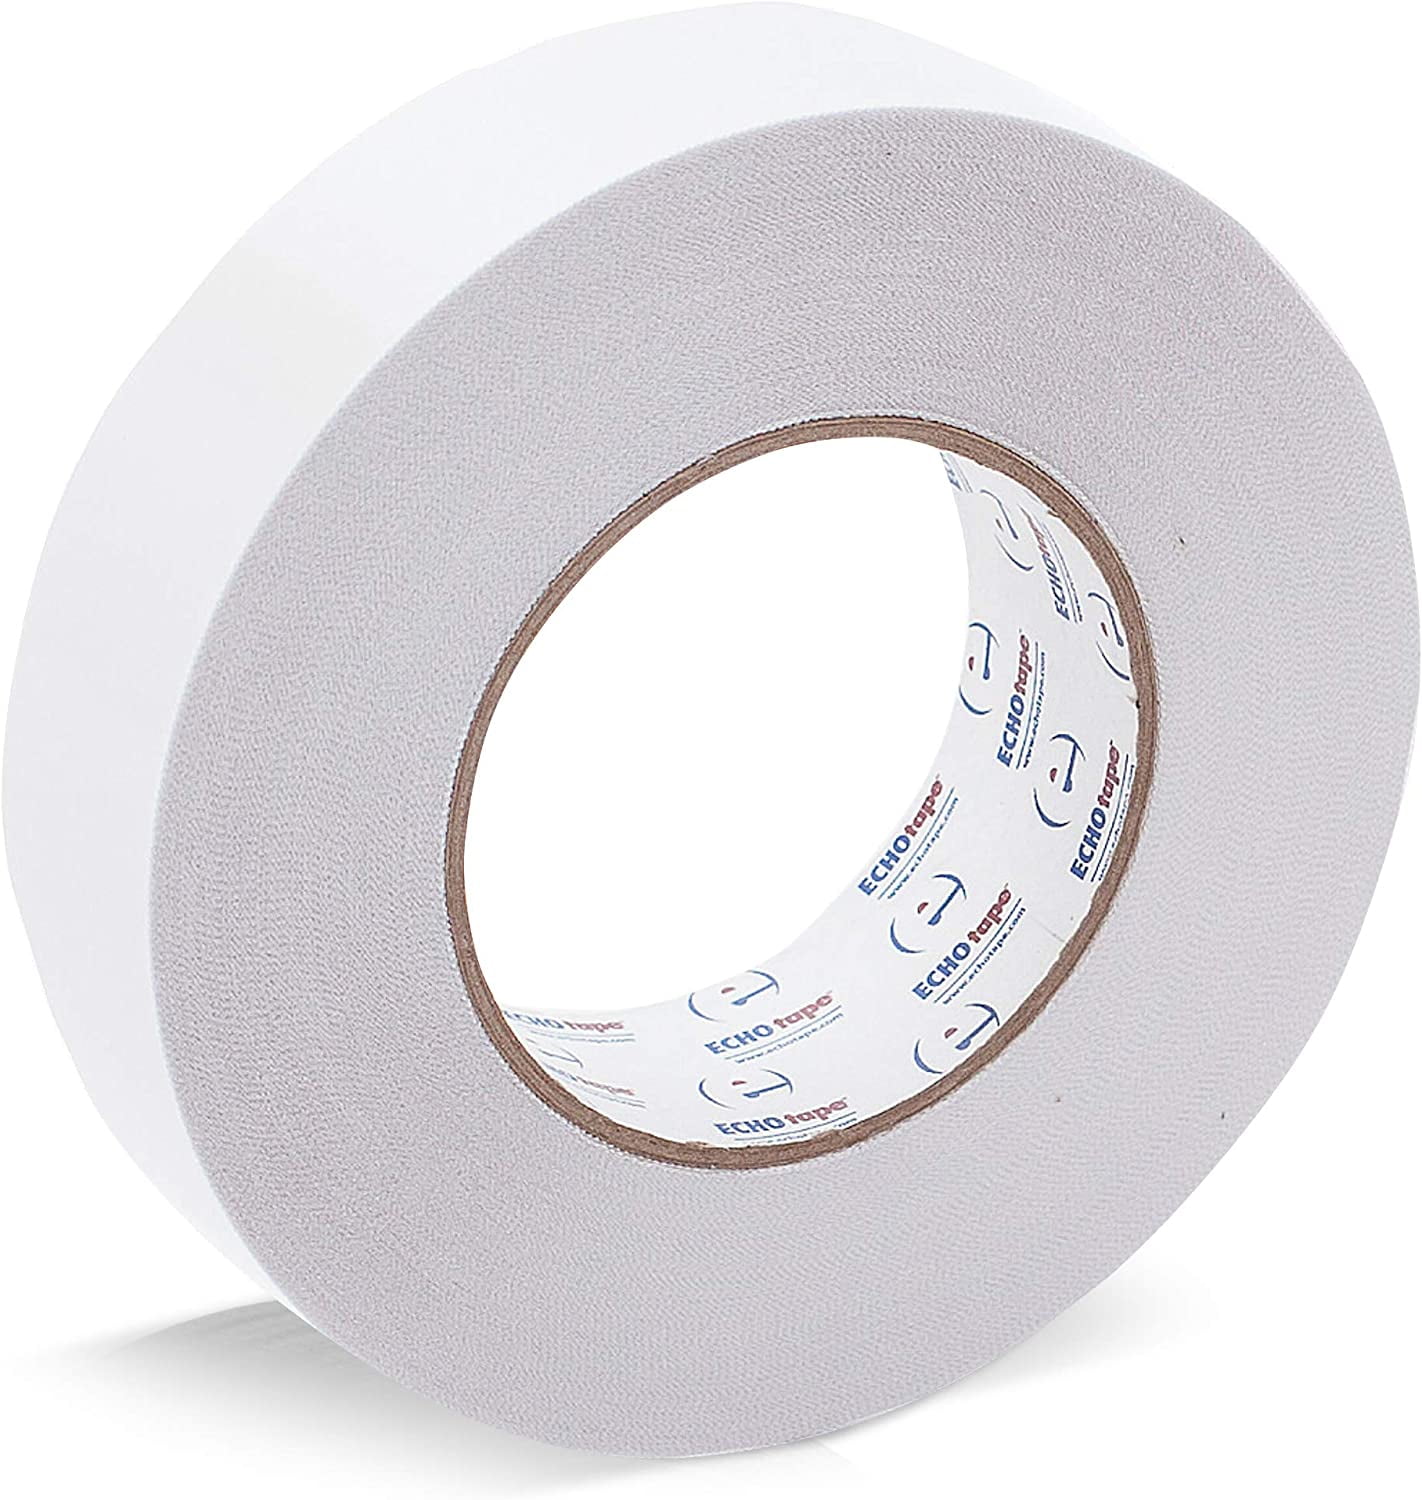 3M 469 Red Double Coated Double Sided Tape, 2 Wide x 60 Yard Roll